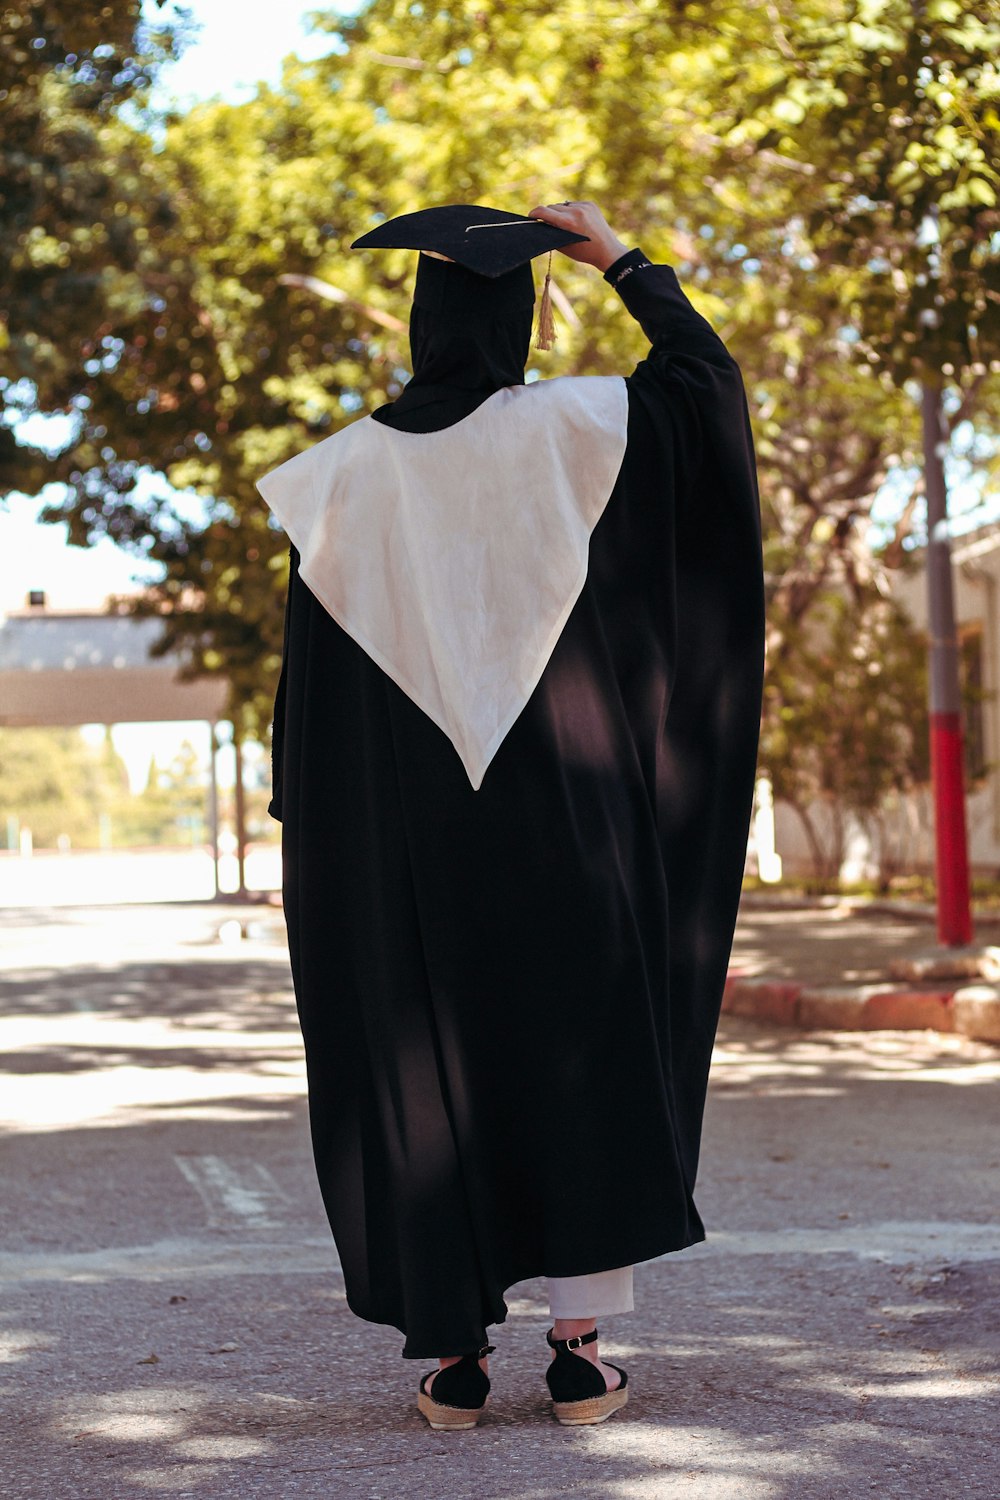 a person dressed in a black and white robe